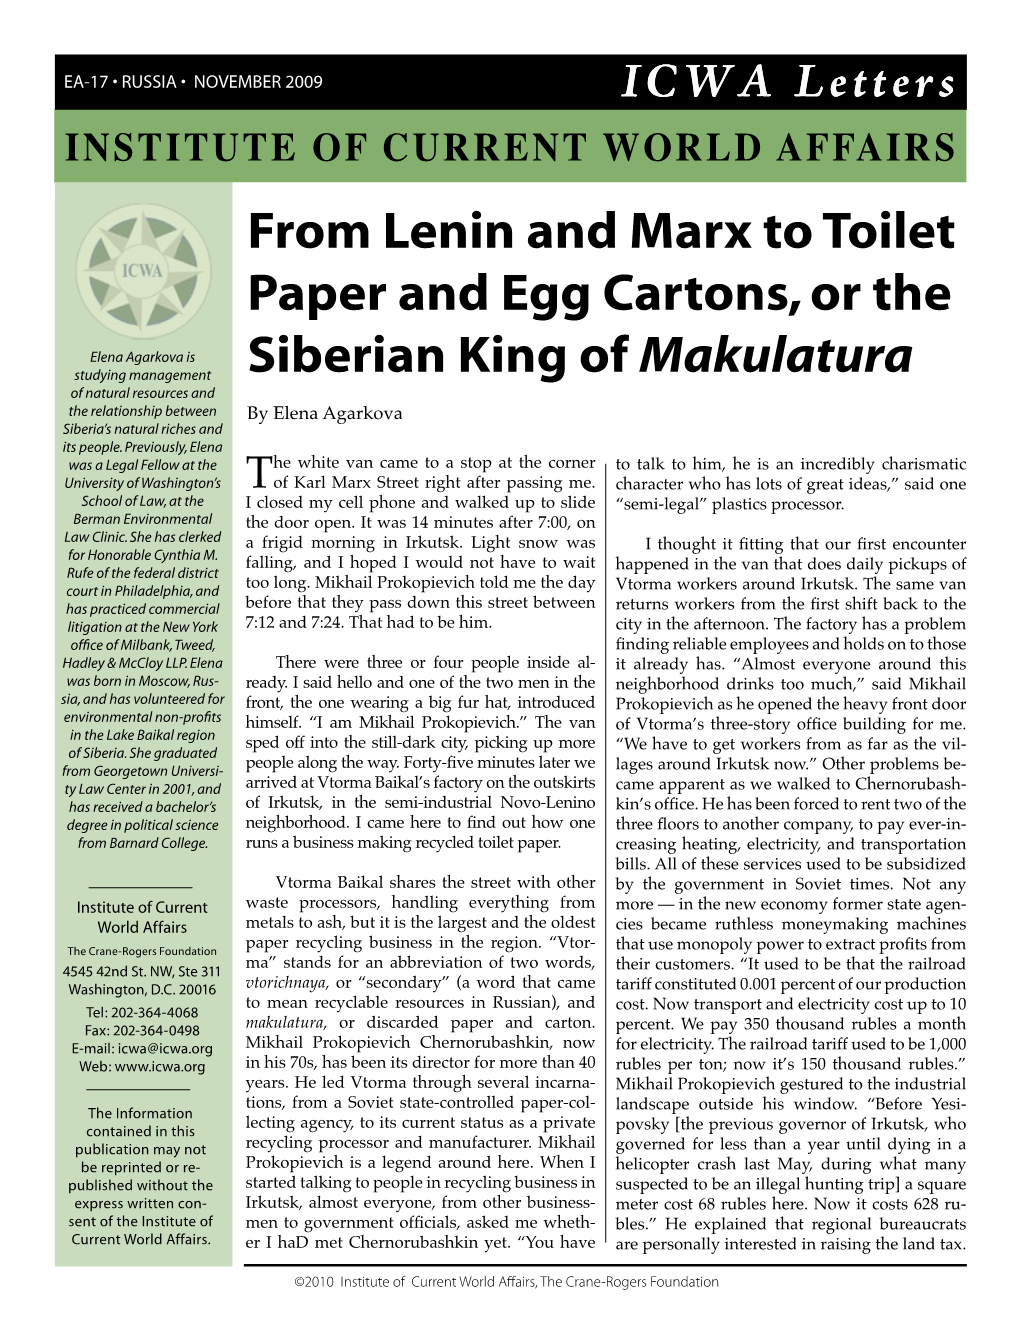 From Lenin and Marx to Toilet Paper and Egg Carton, Or the Siberian